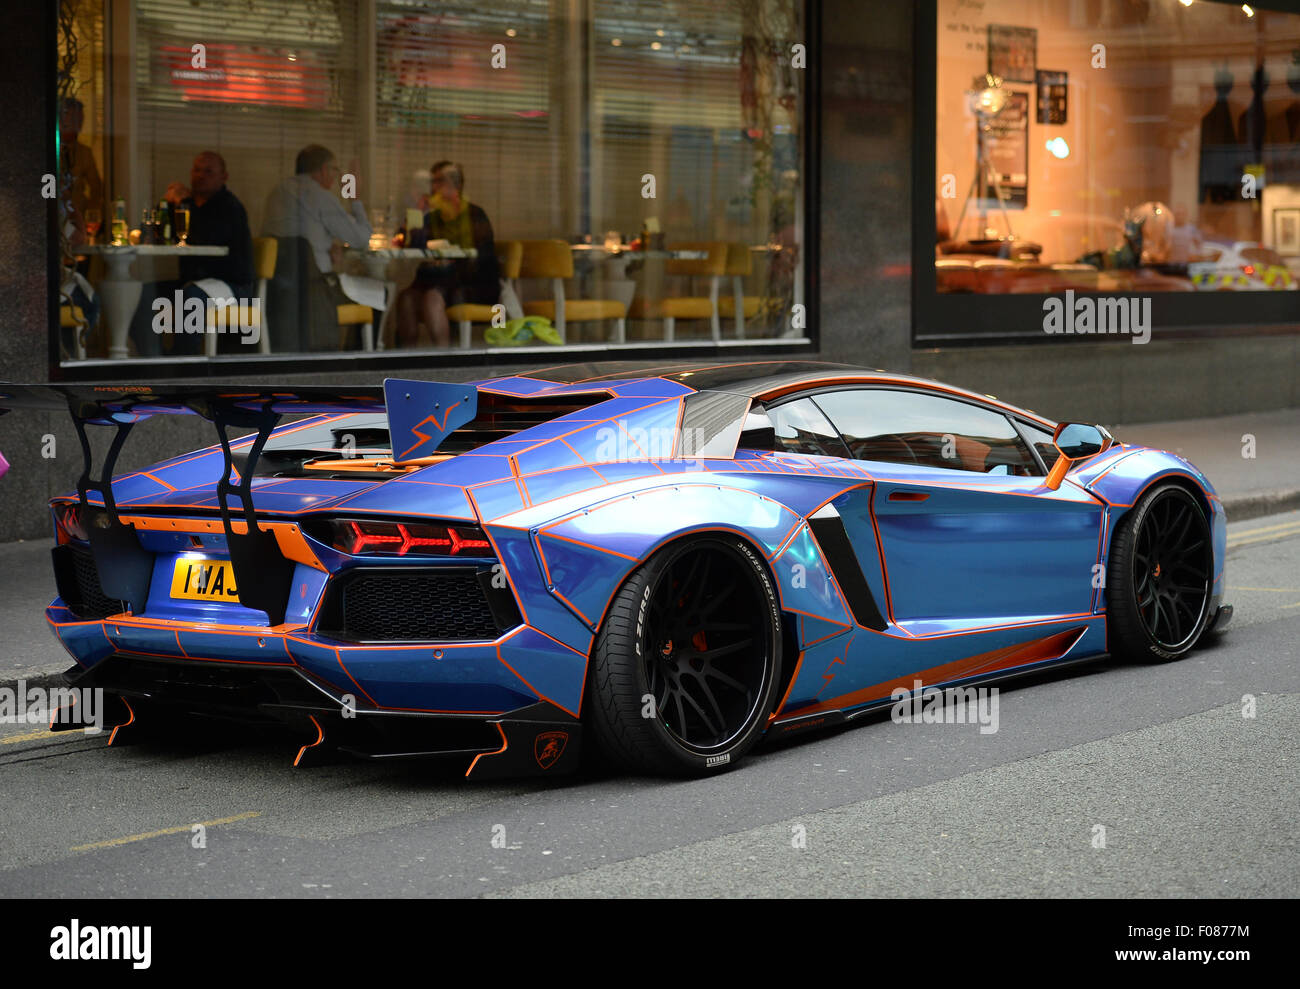 A Lamborghini Aventador with a Tron design cutomised by Oakley Design  parked on double yellow lines in Manchester City Centre Stock Photo - Alamy